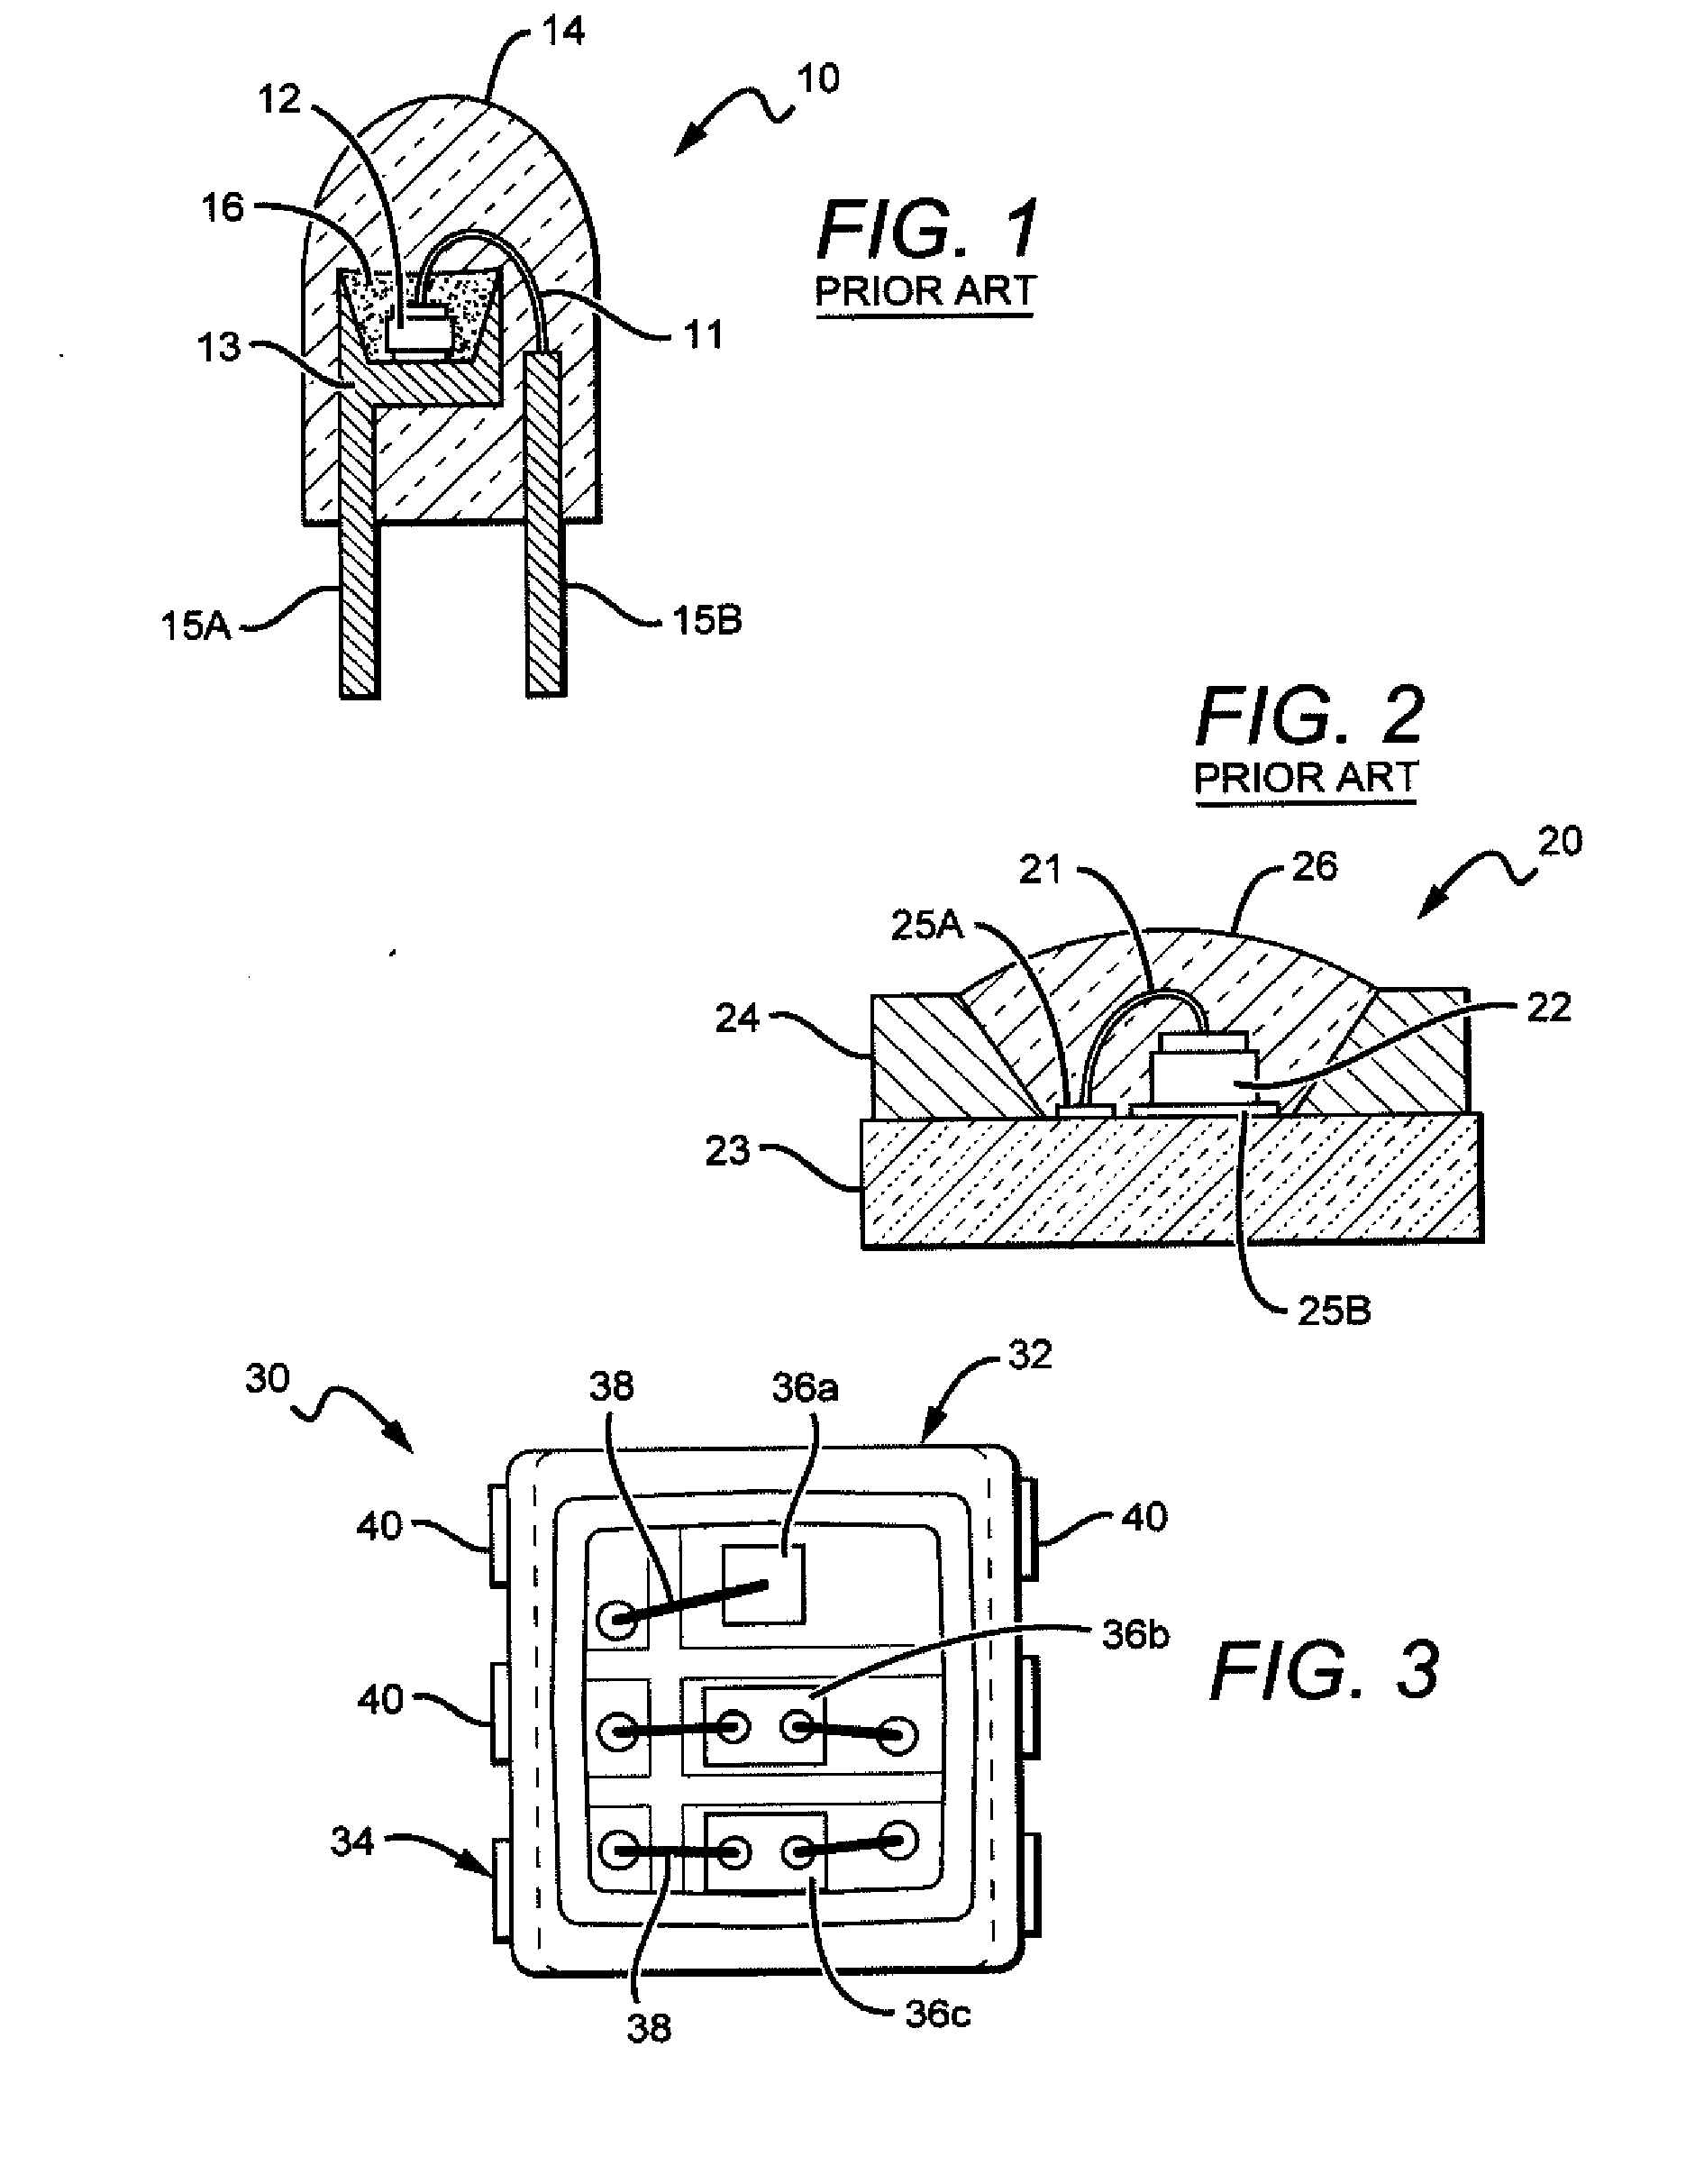 Multiple pixel surface mount device package